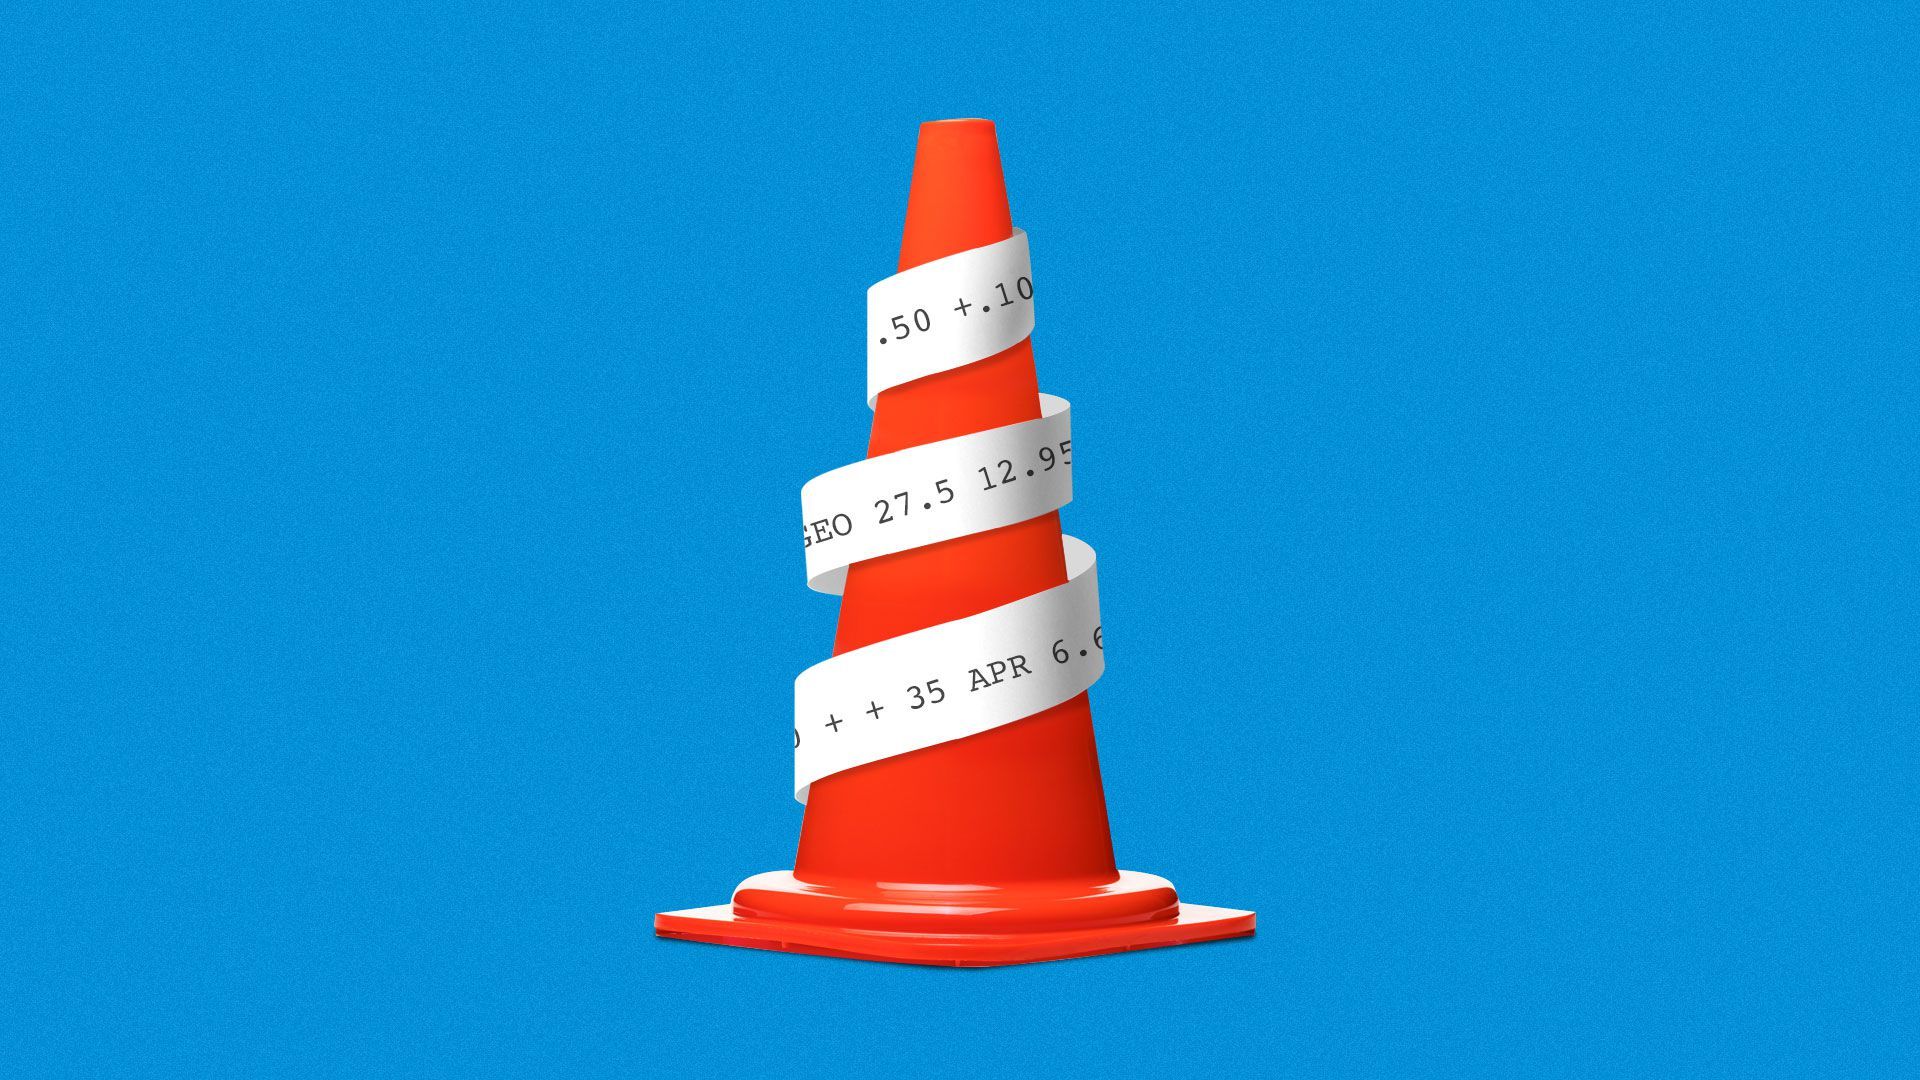 Illustration of a safety cone